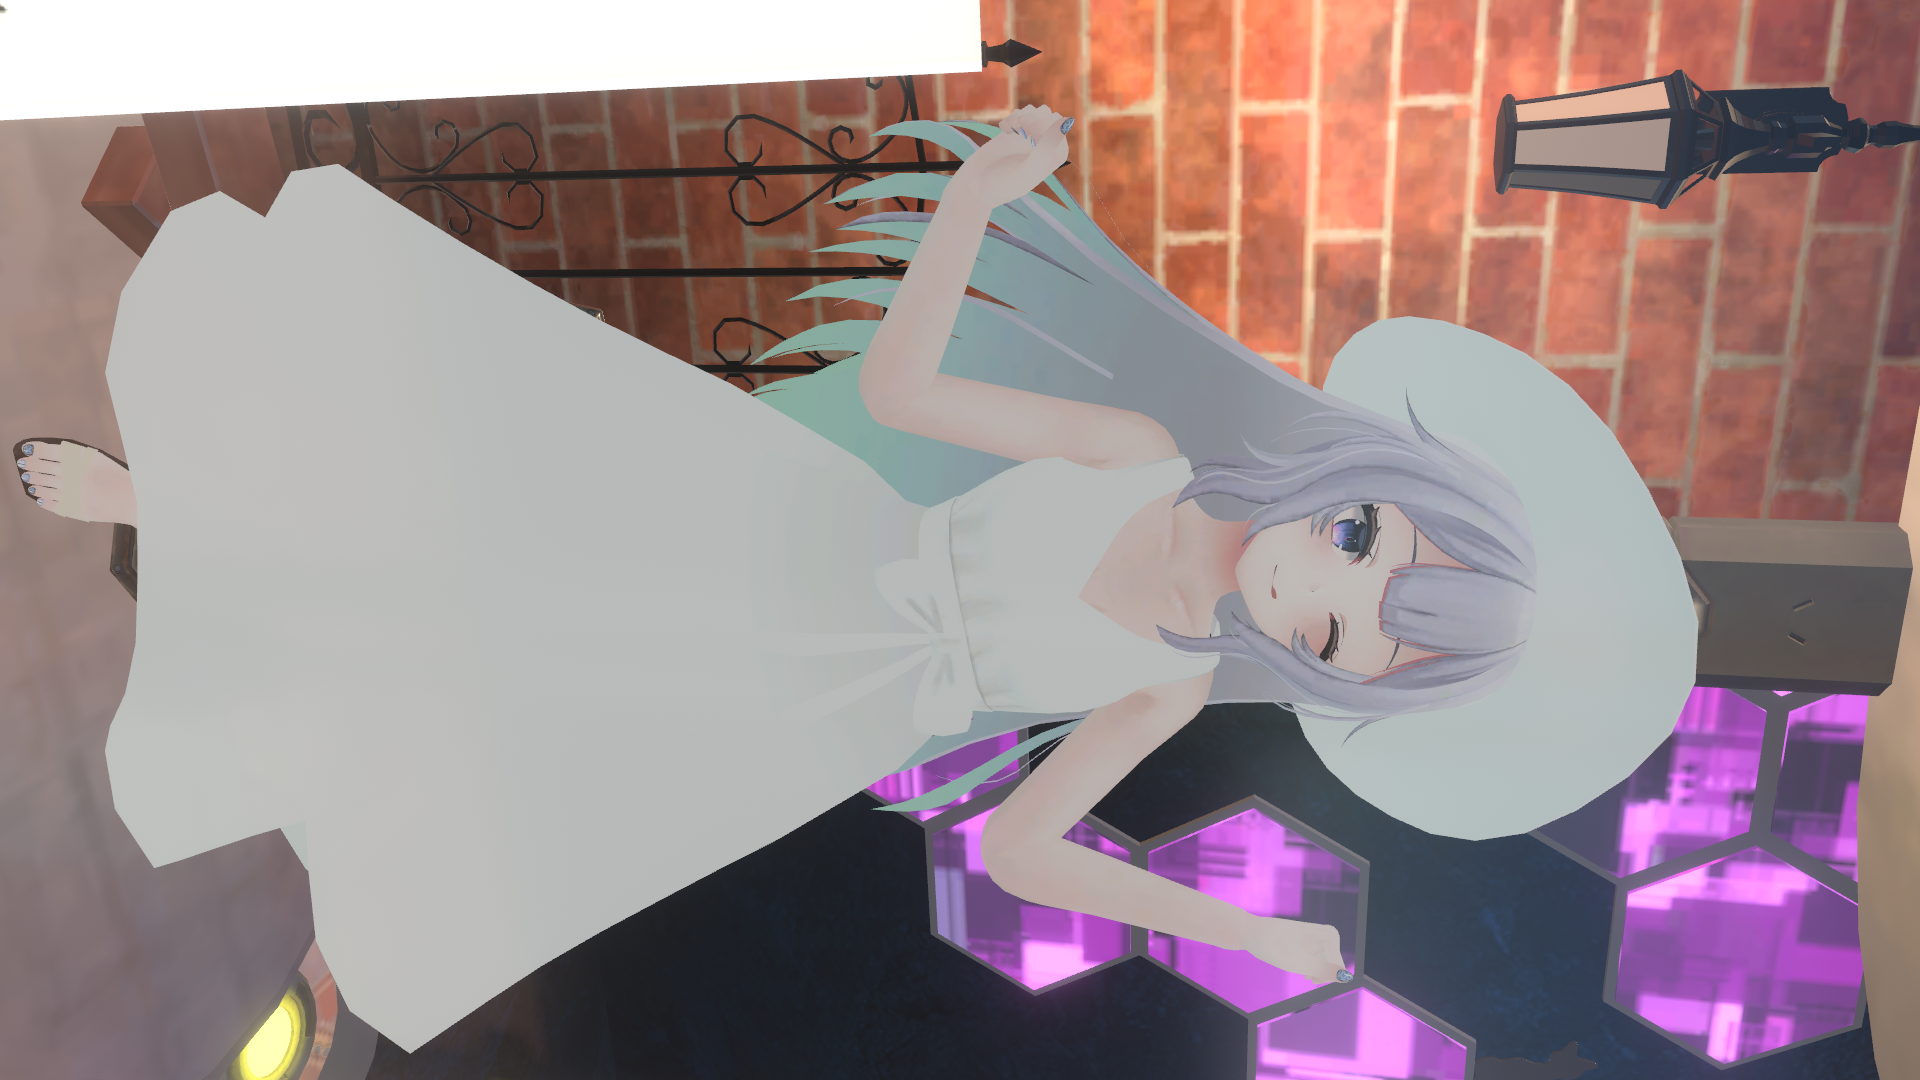 VRChat_1920x1080_2021-12-05_03-41-41.806.png